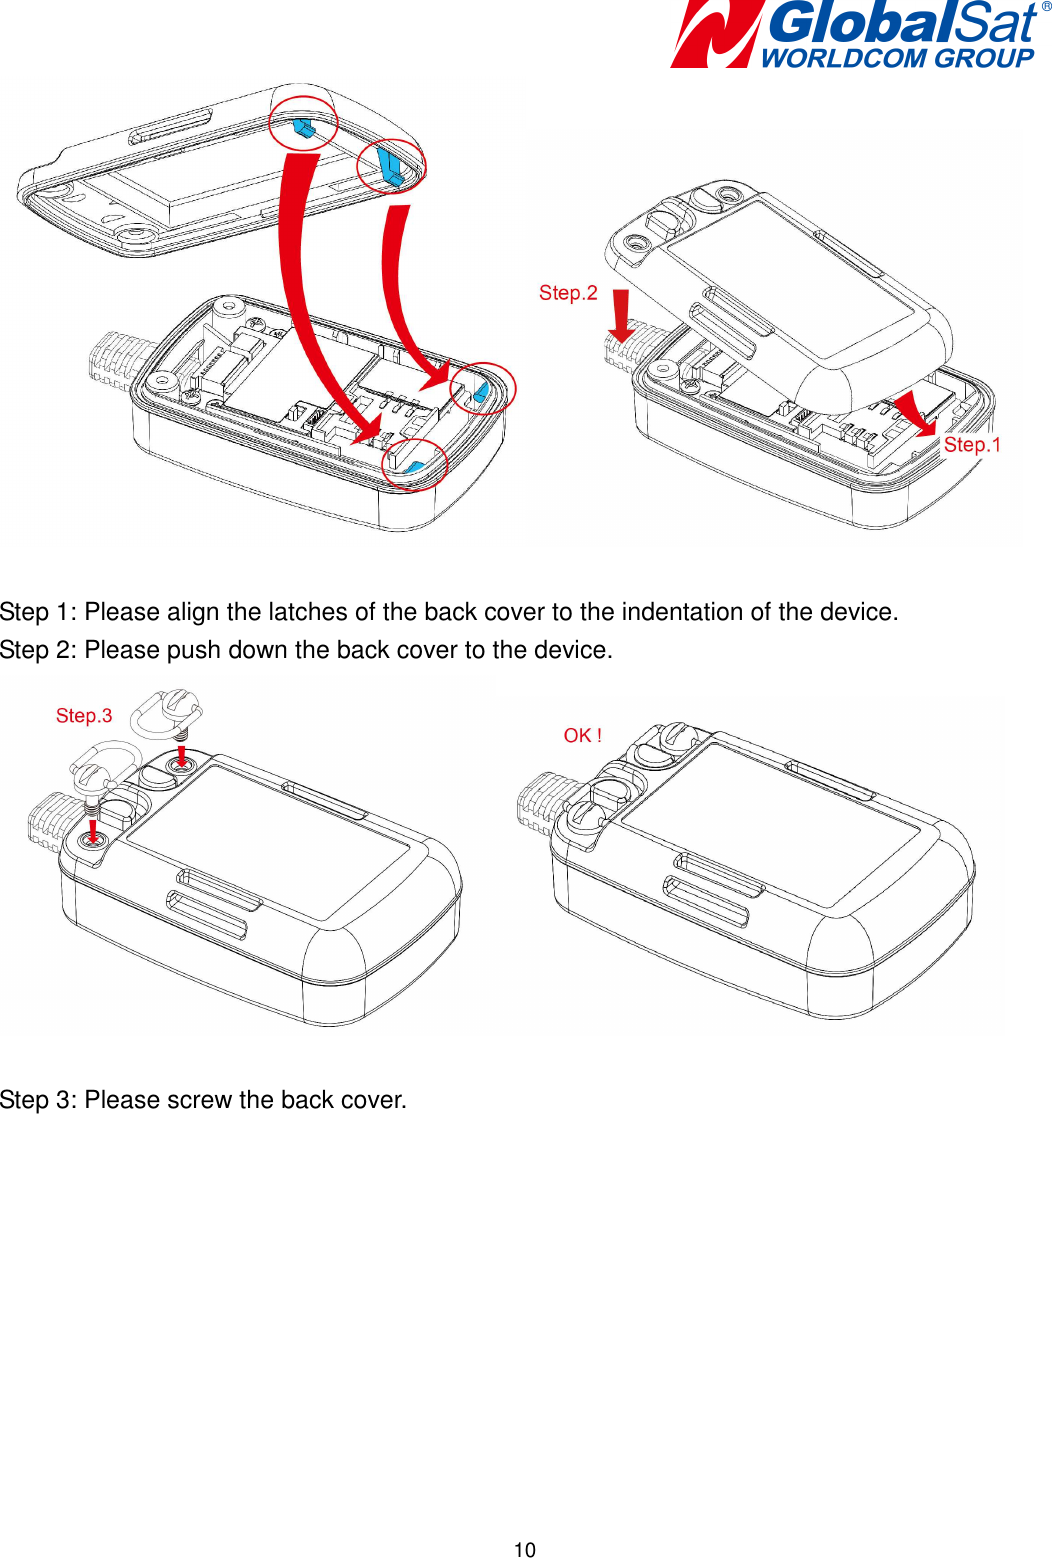   10  Step 1: Please align the latches of the back cover to the indentation of the device. Step 2: Please push down the back cover to the device.     Step 3: Please screw the back cover. 